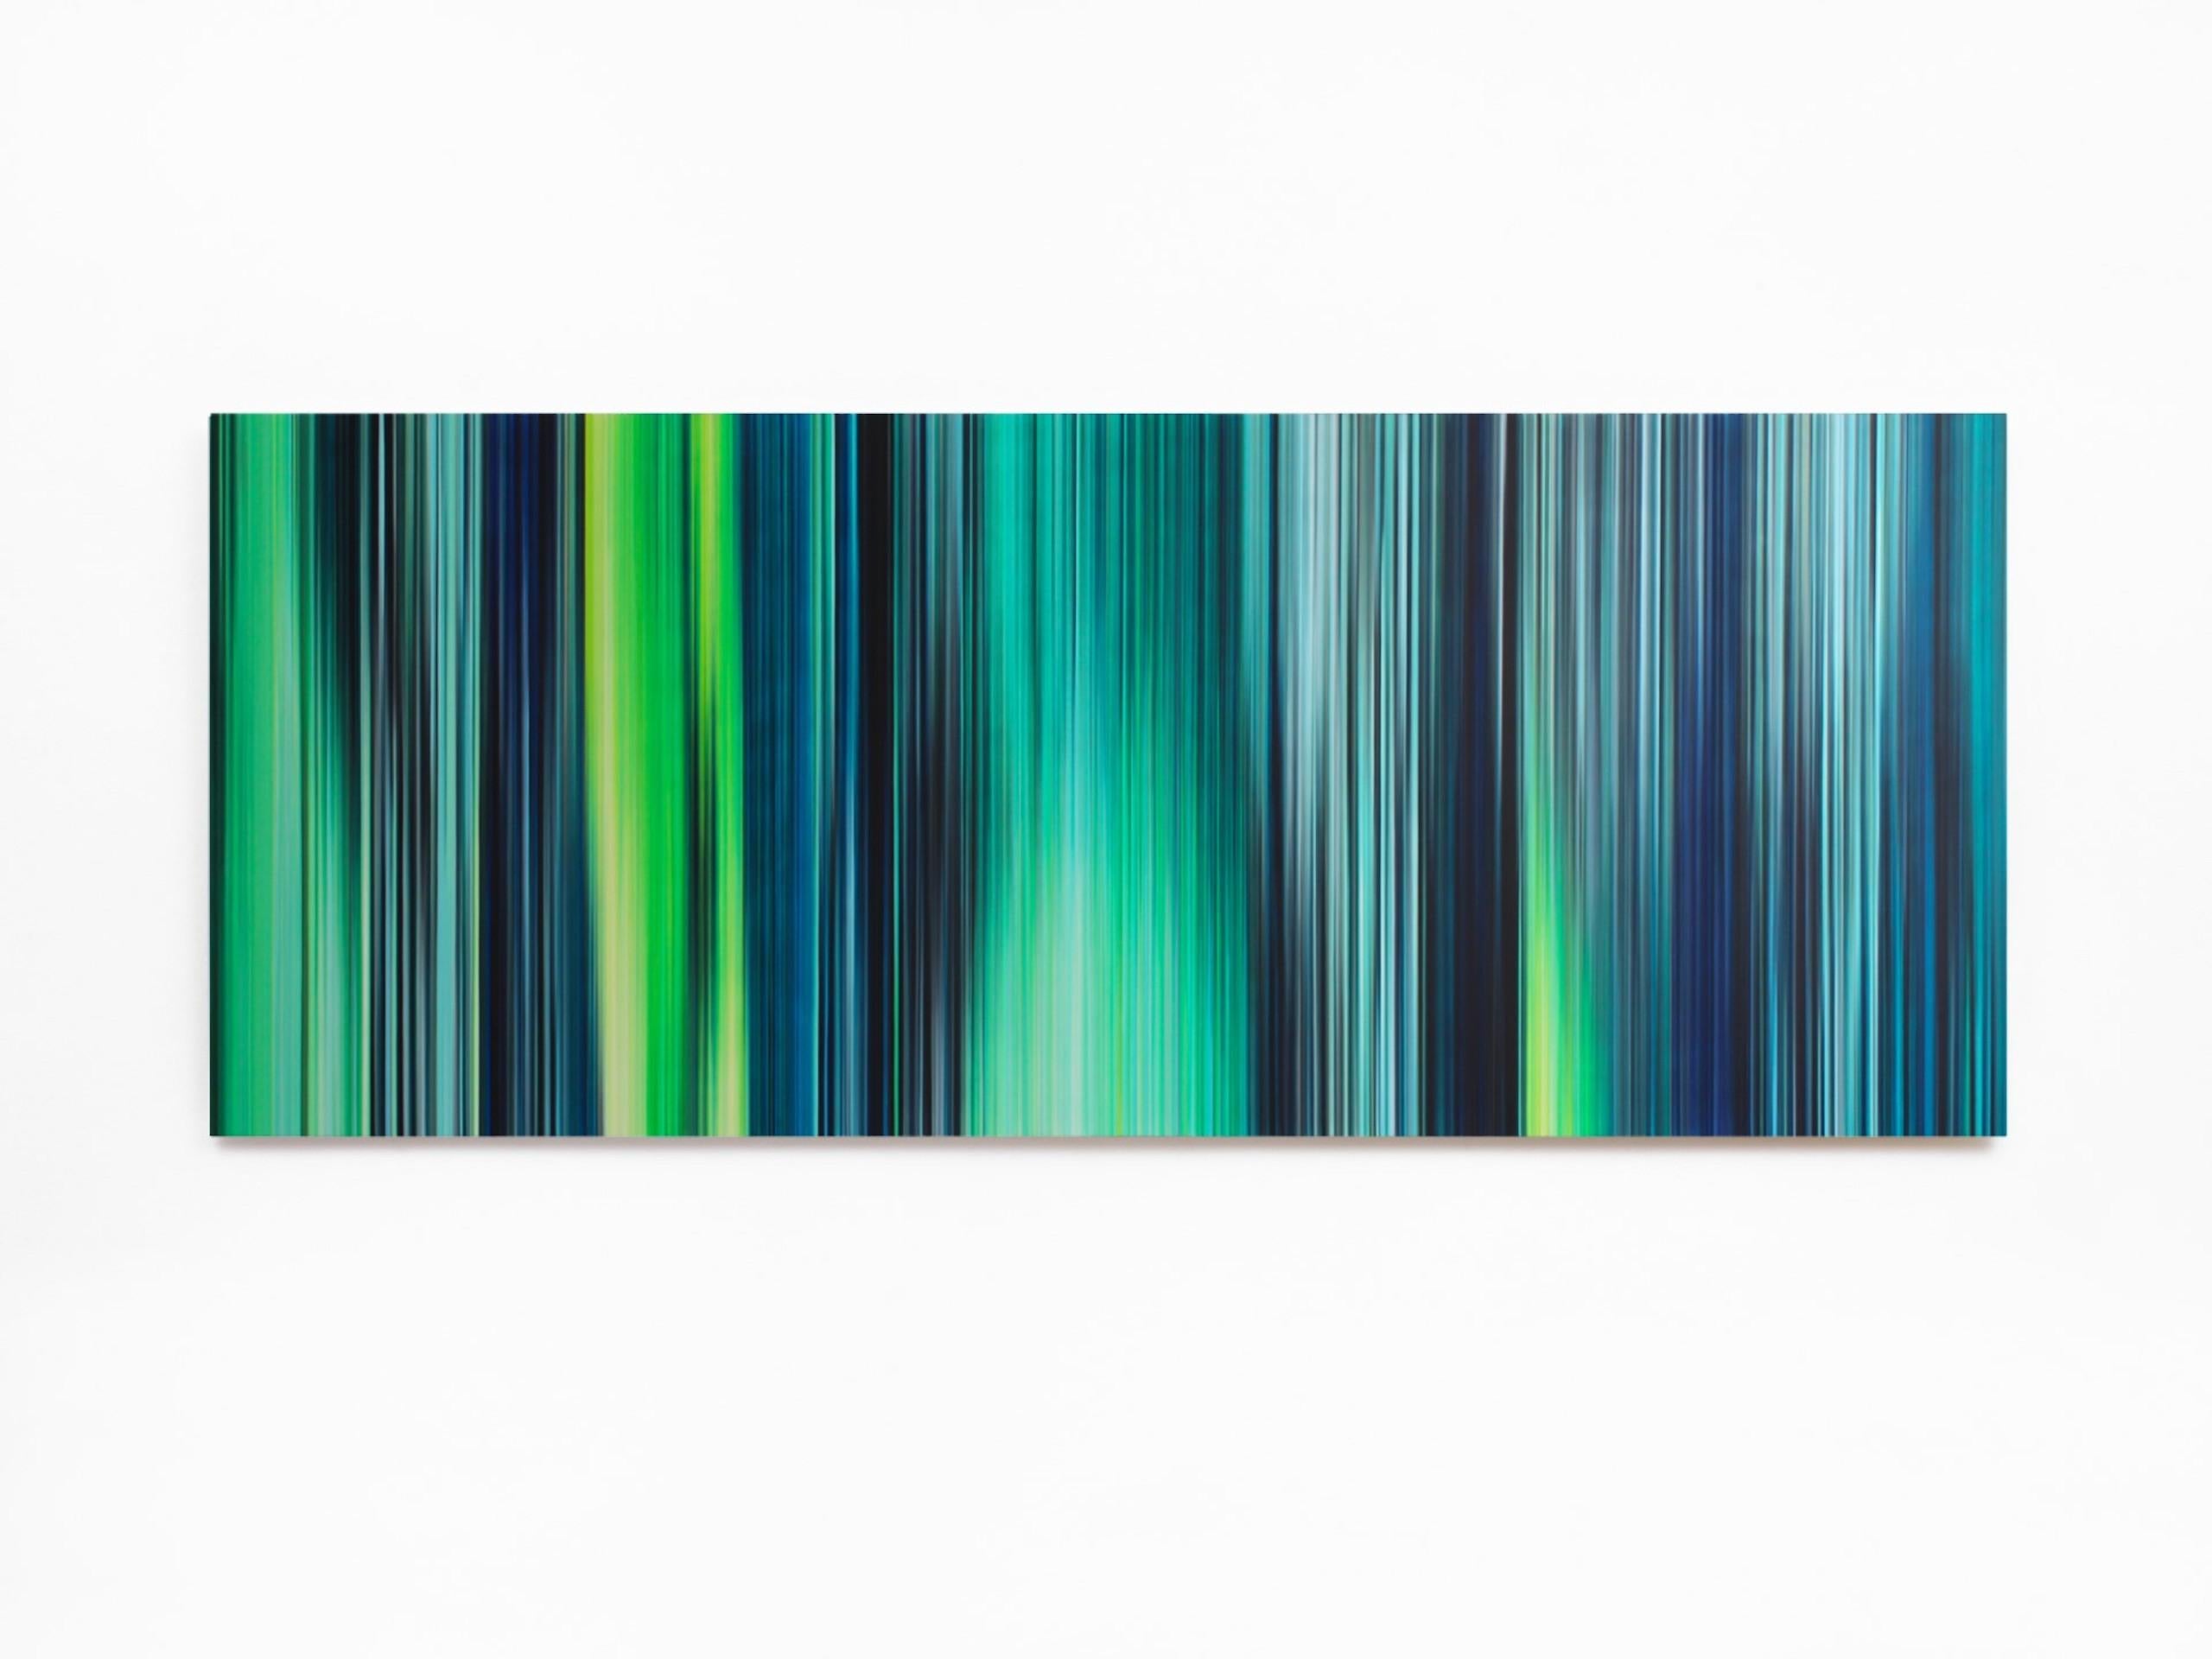 Light’n’Lines No.36 is a unique oil on Alu-Dibond painting by contemporary artist Doris Marten, dimensions are 80 × 200 cm (31.5 × 78.7 in).
The artwork is signed, sold unframed and comes with a certificate of authenticity.

The visual effects